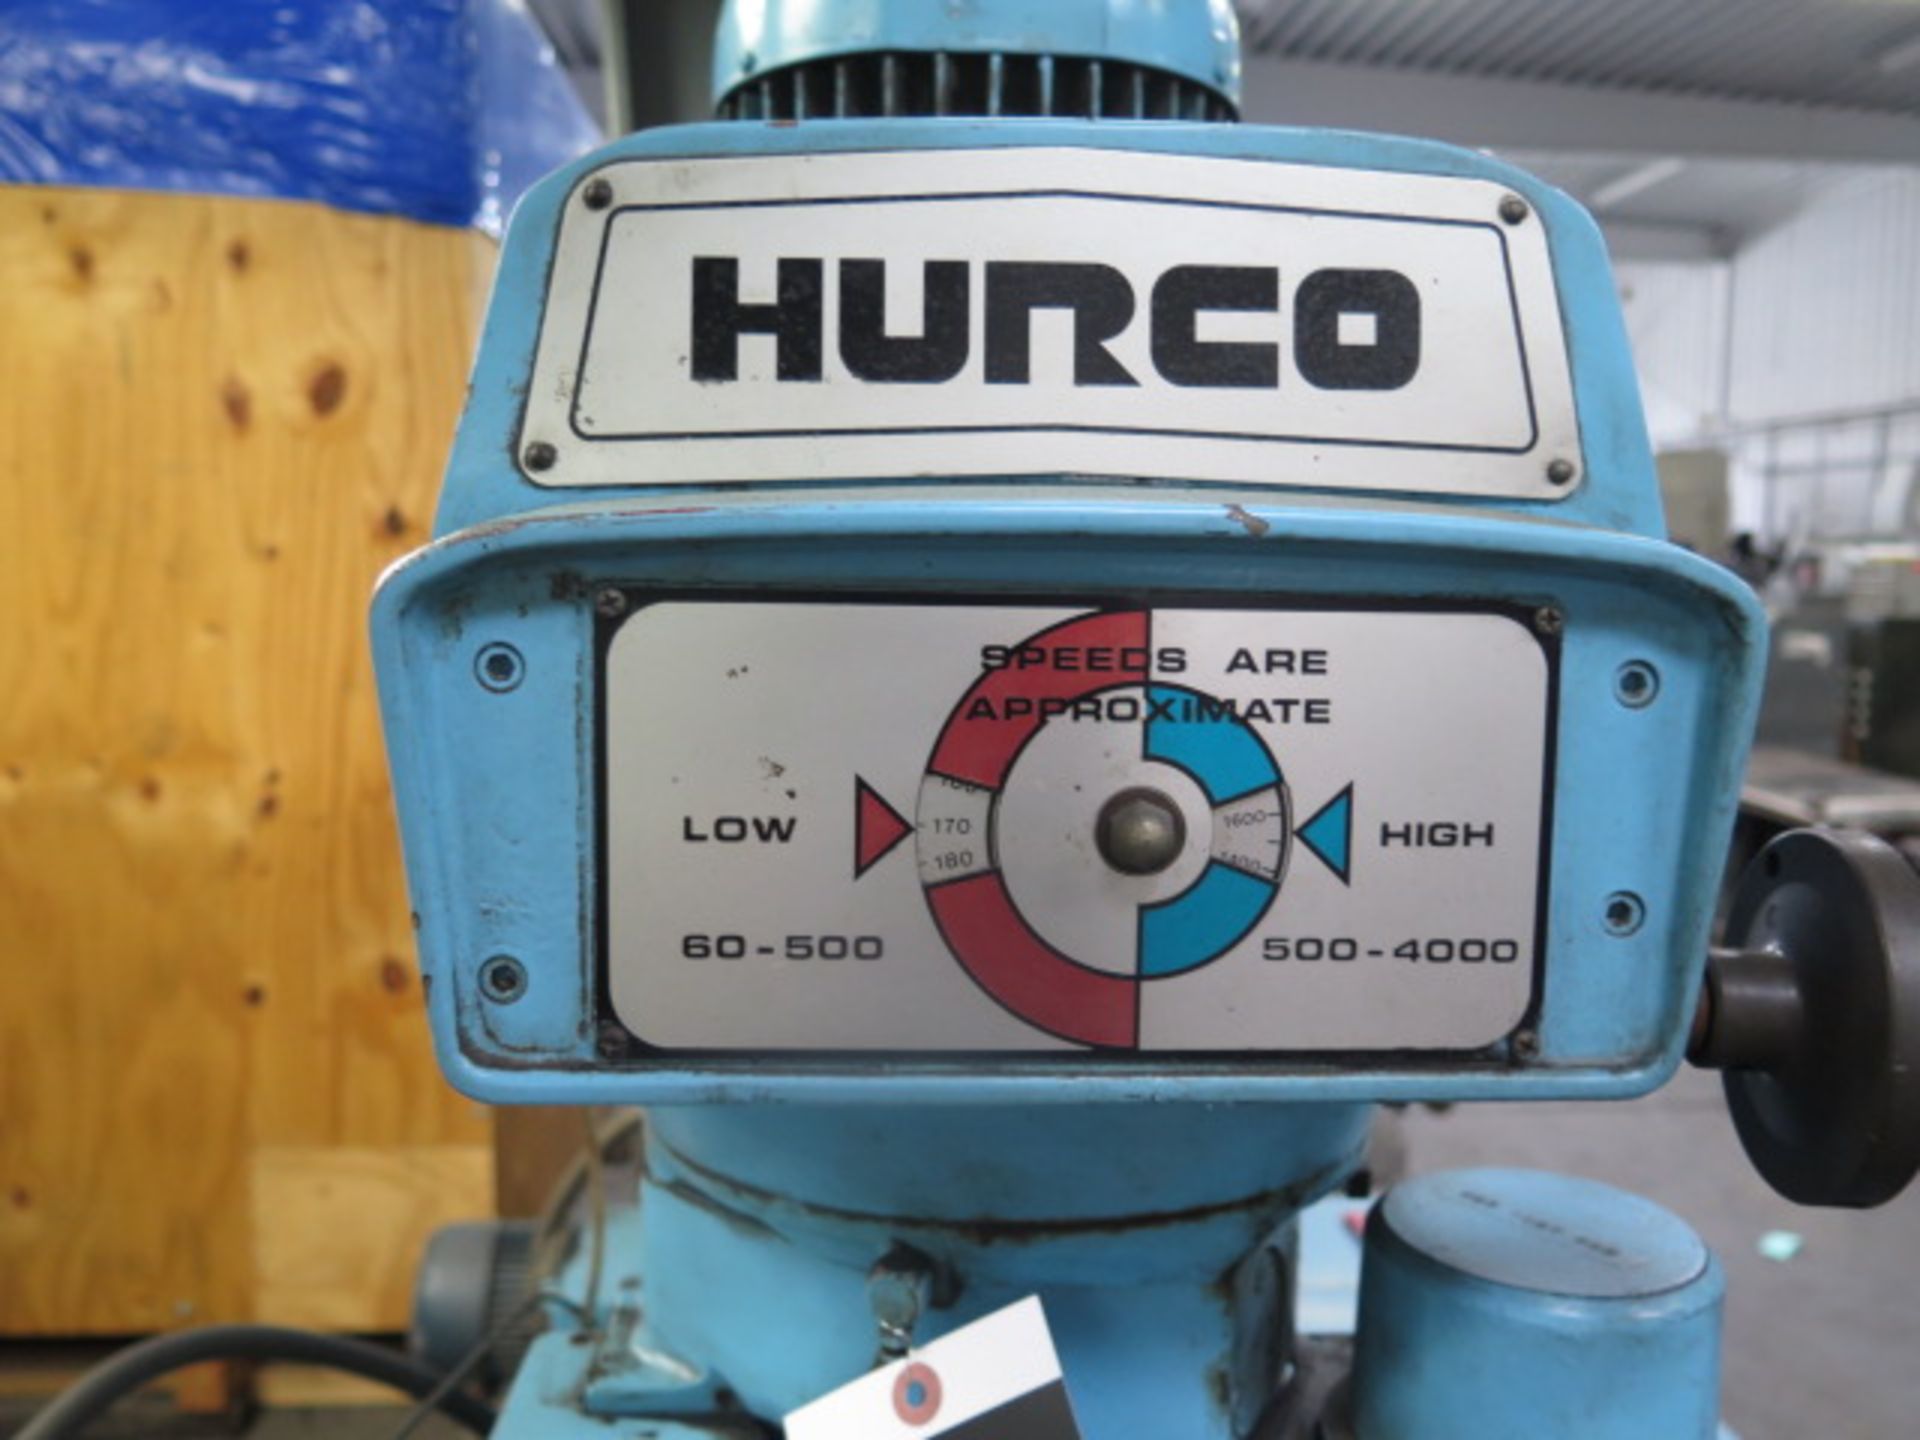 Hurco 3-Axis CNC Vertical Mill s/n SDX-8016074A w/ Centroid Controls, 60-4200 Dial RPM, SOLD AS IS - Image 11 of 12